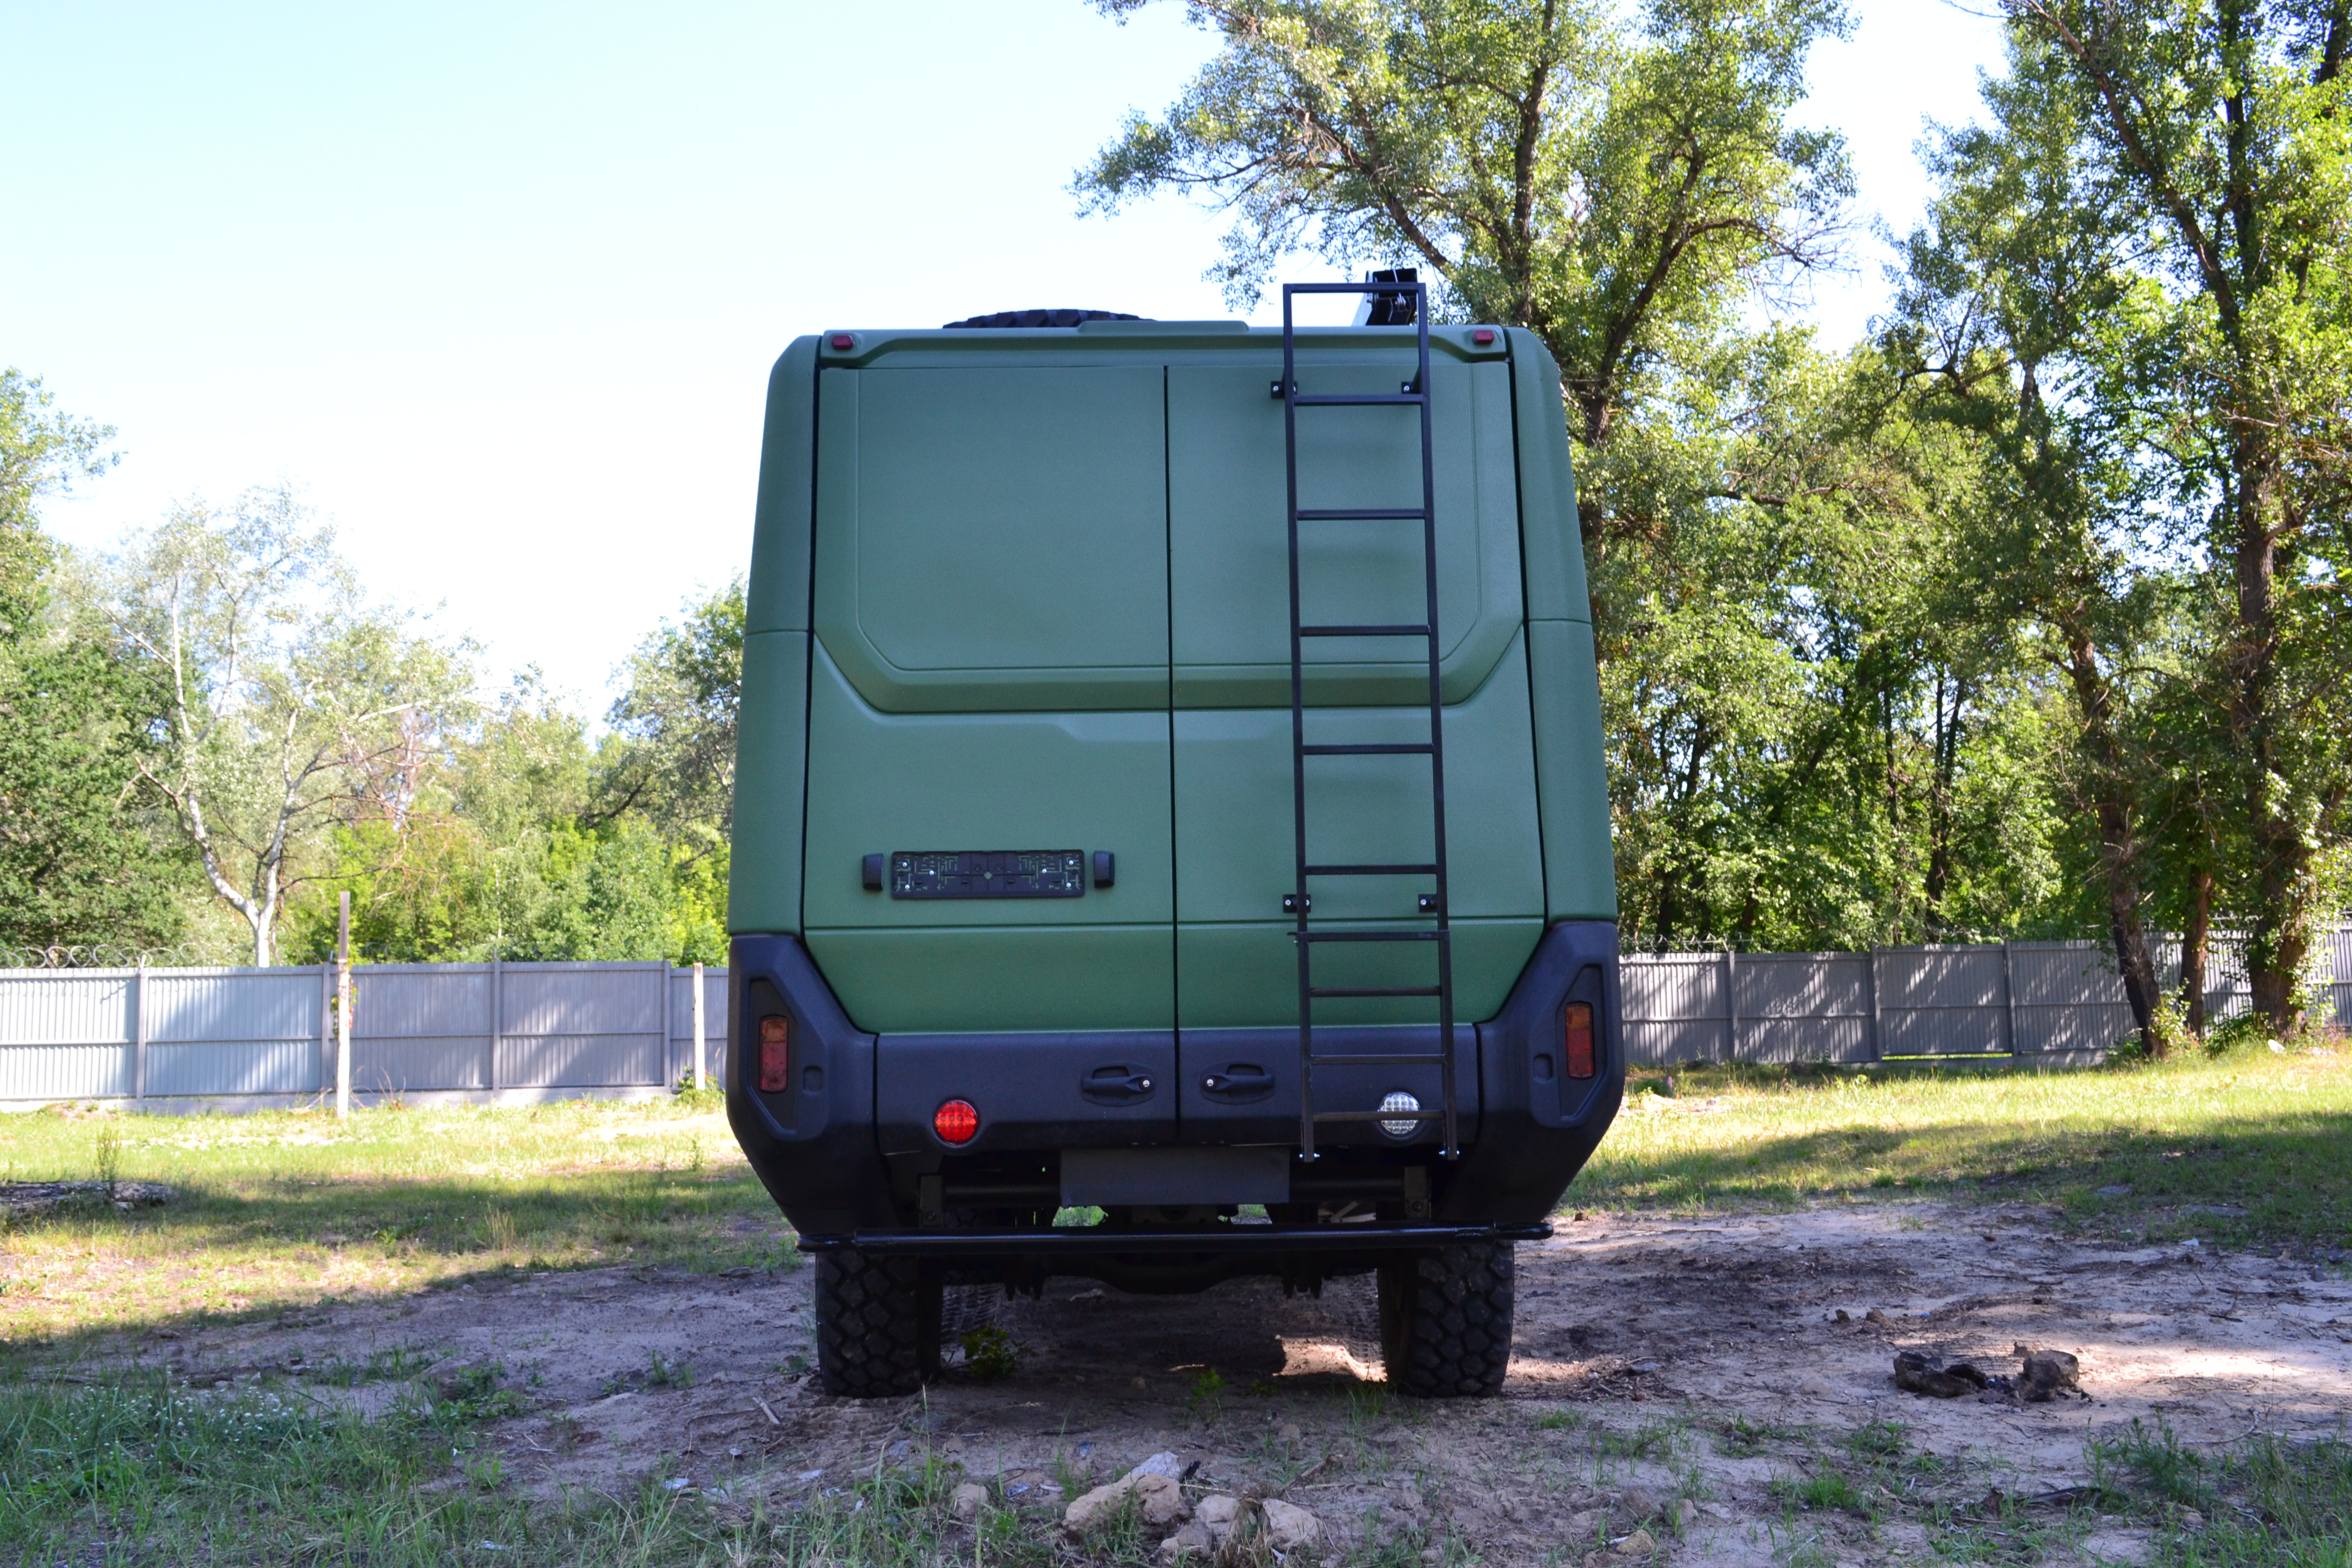 An ambulance version of the Tursus Praetorian bus sold to the National Guard of Ukraine. Its creators claim it can fit up to 12 wounded patients and some medical staff. (Torsus)